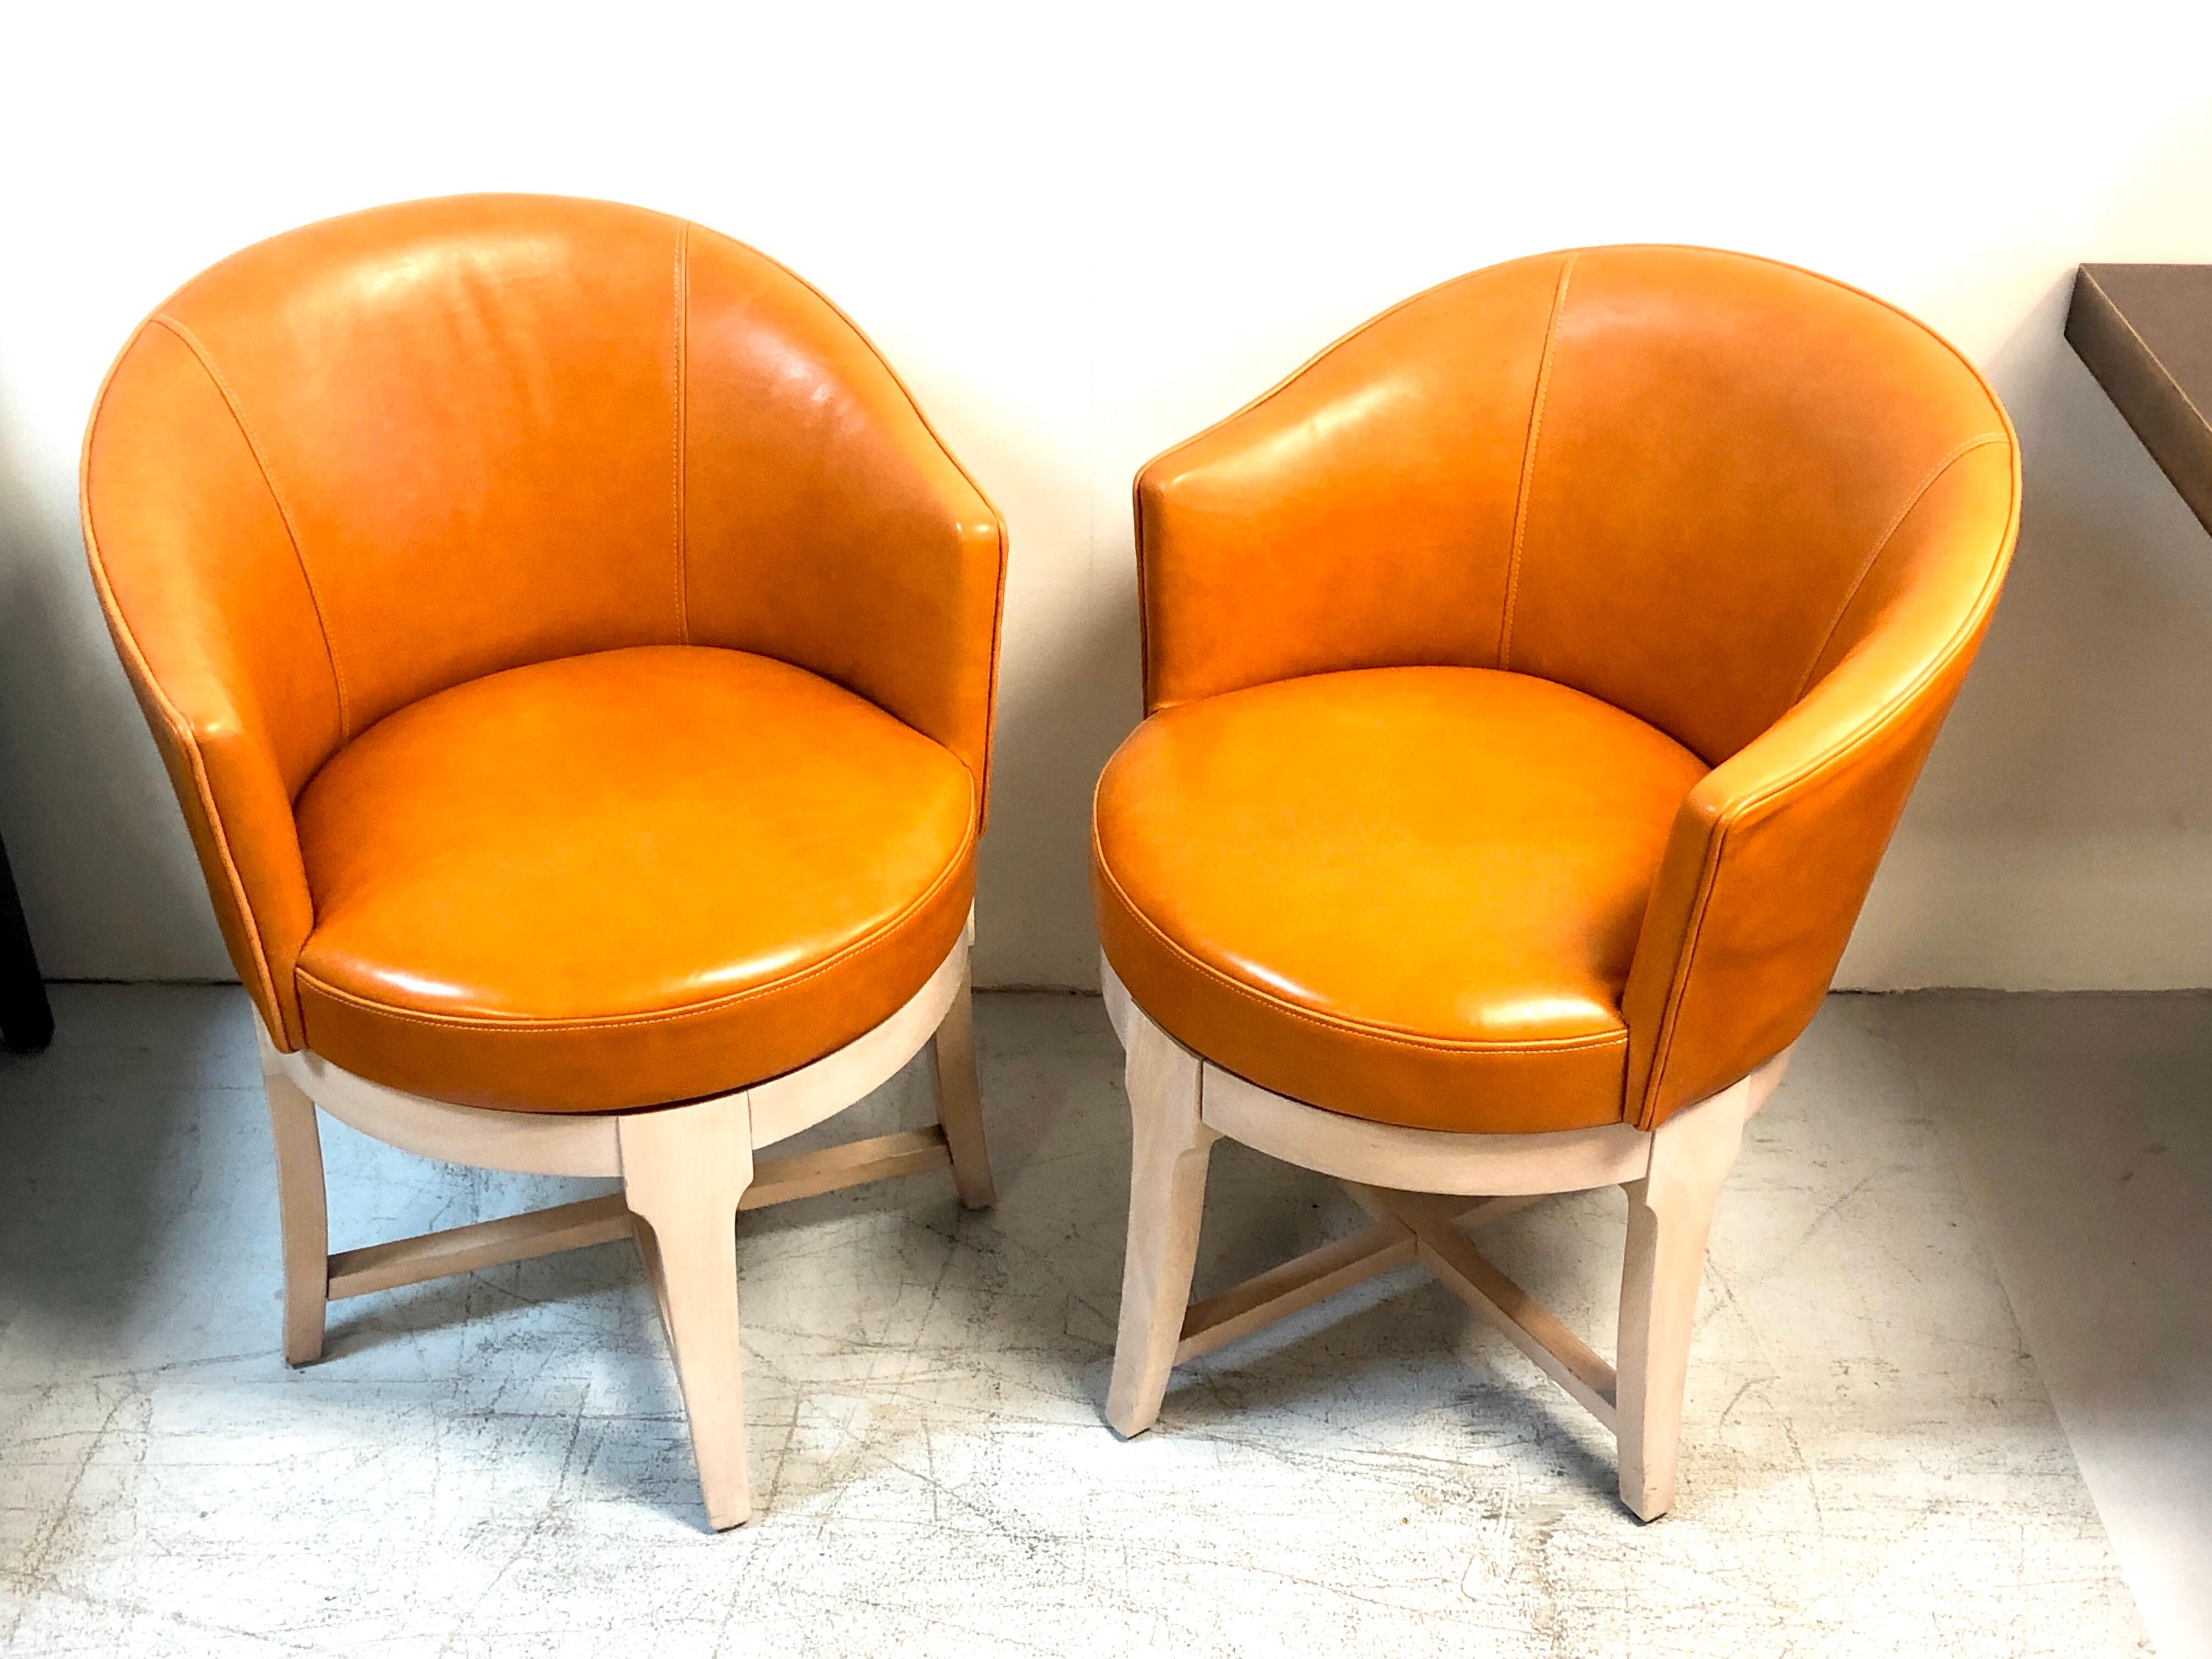 A pair of chic swivel chairs. Cognac leather upholstery on a round solid wood base.